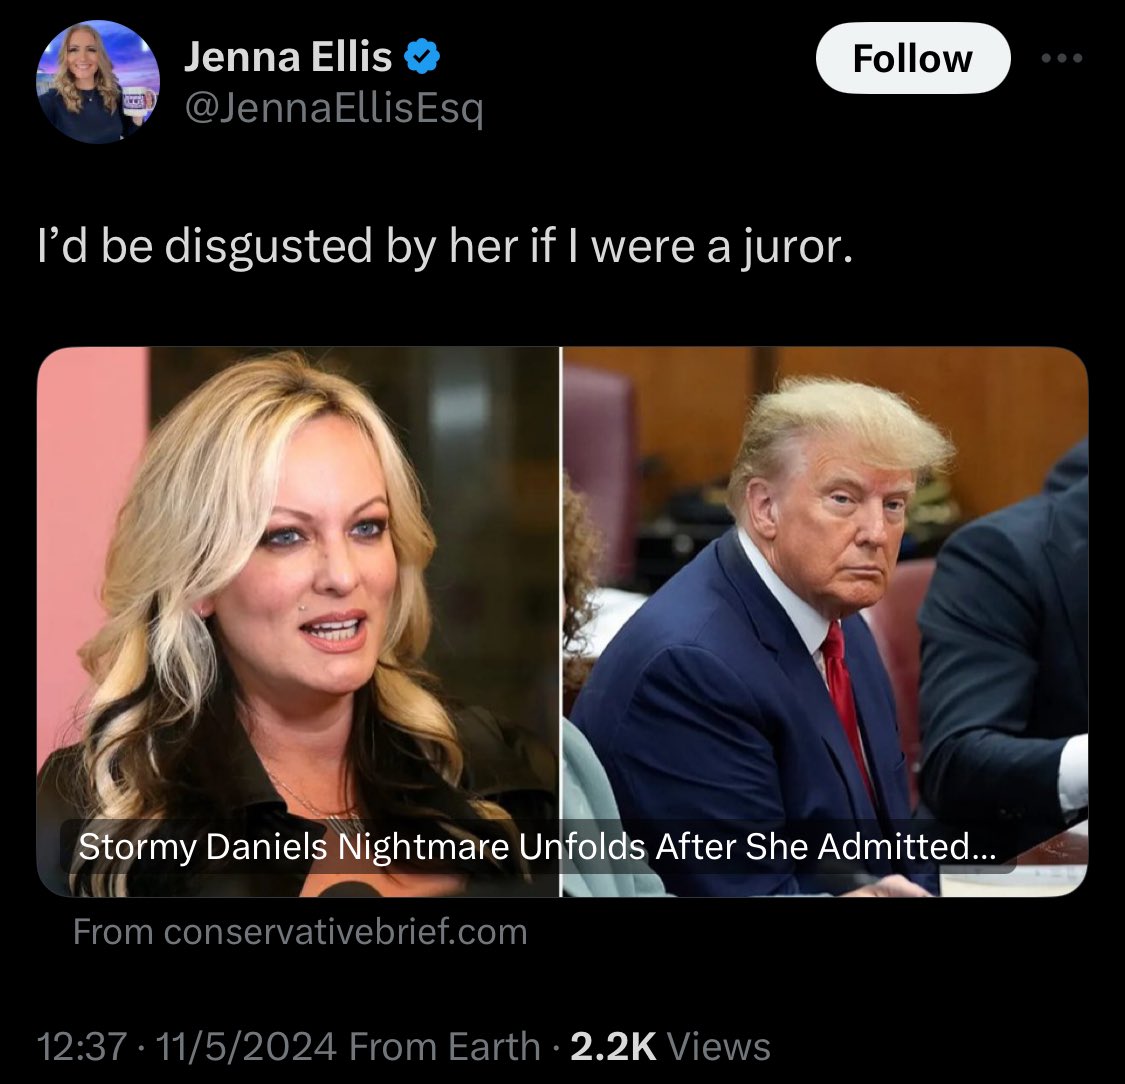 They are more disgusted by Stormy Daniels but not by Donald Trump who slept with her while his wife was pregnant with their son and paid Stormy $130,000 to keep quiet. 

Talk about those Christian double standards.